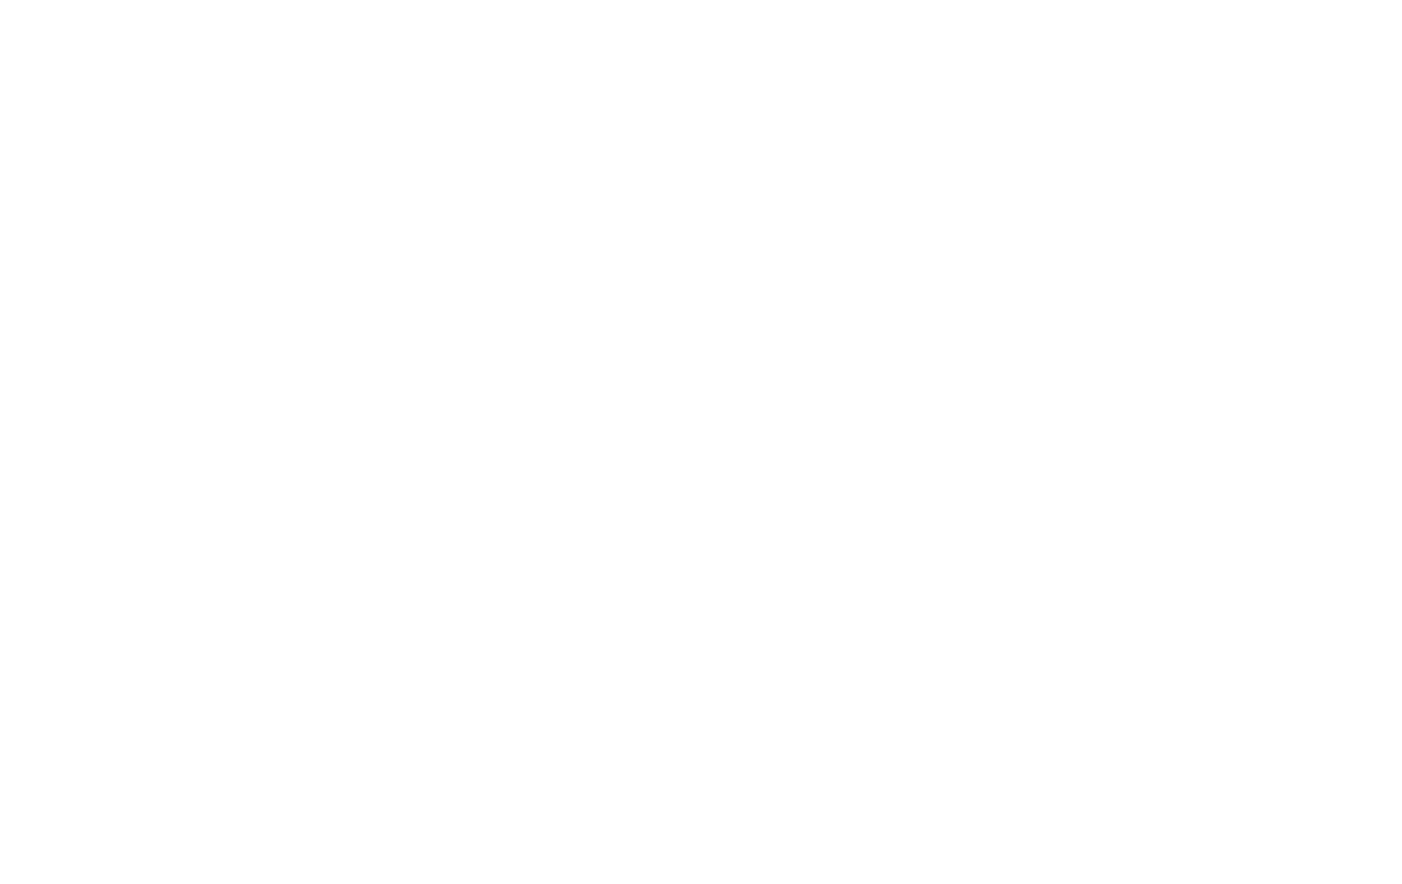 SWAVE